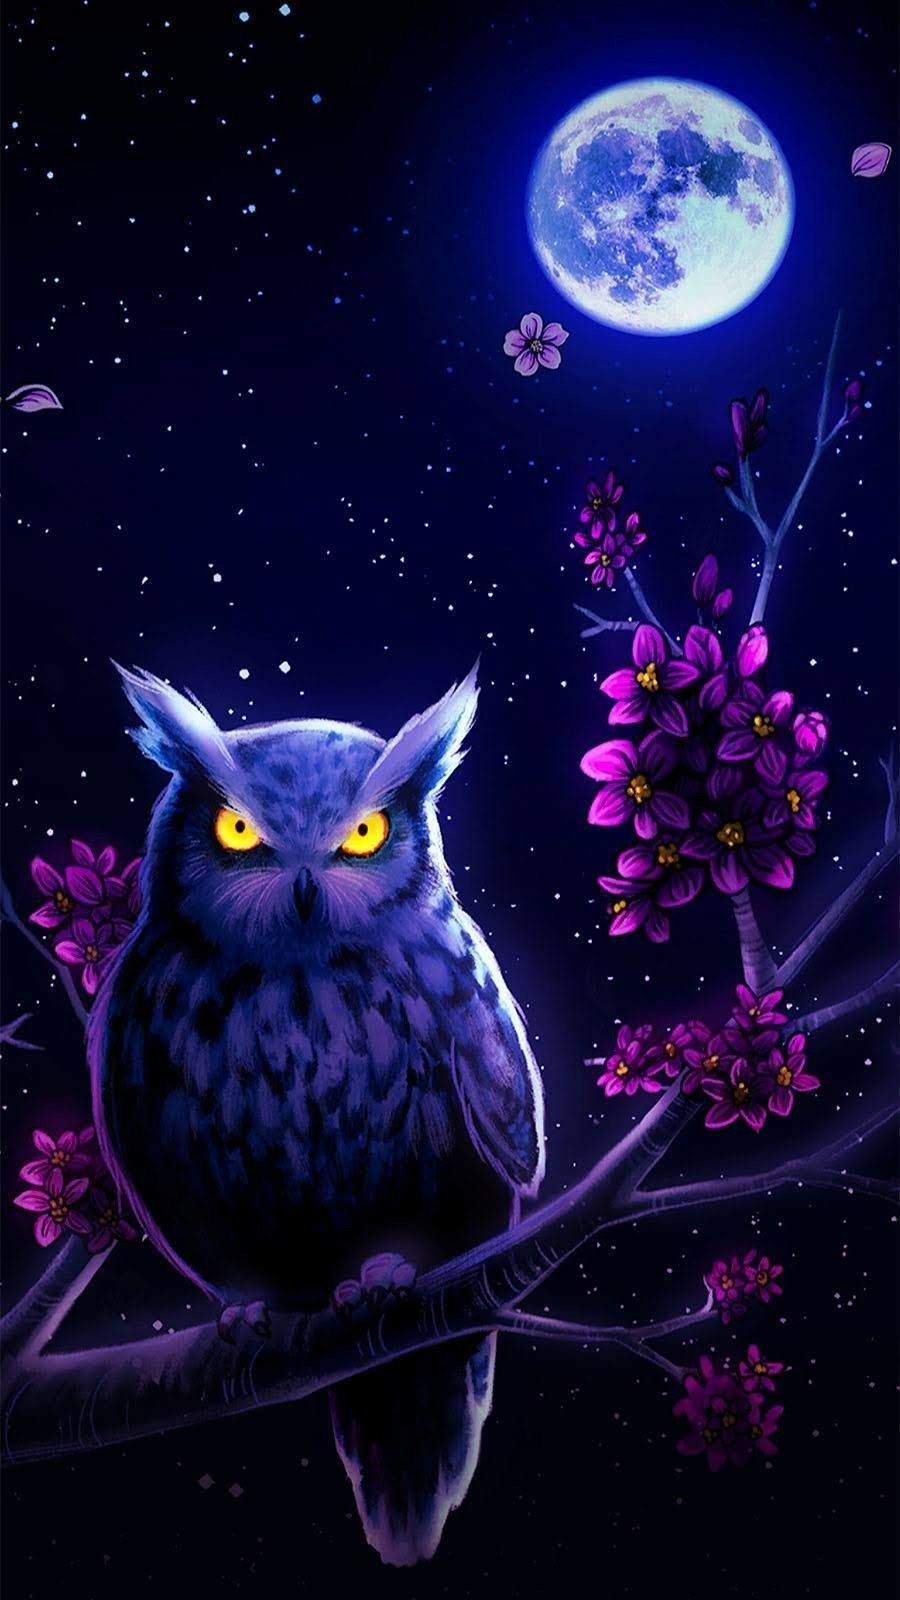 Night owl. Owl wallpaper, Owl wallpaper iphone, Owl picture